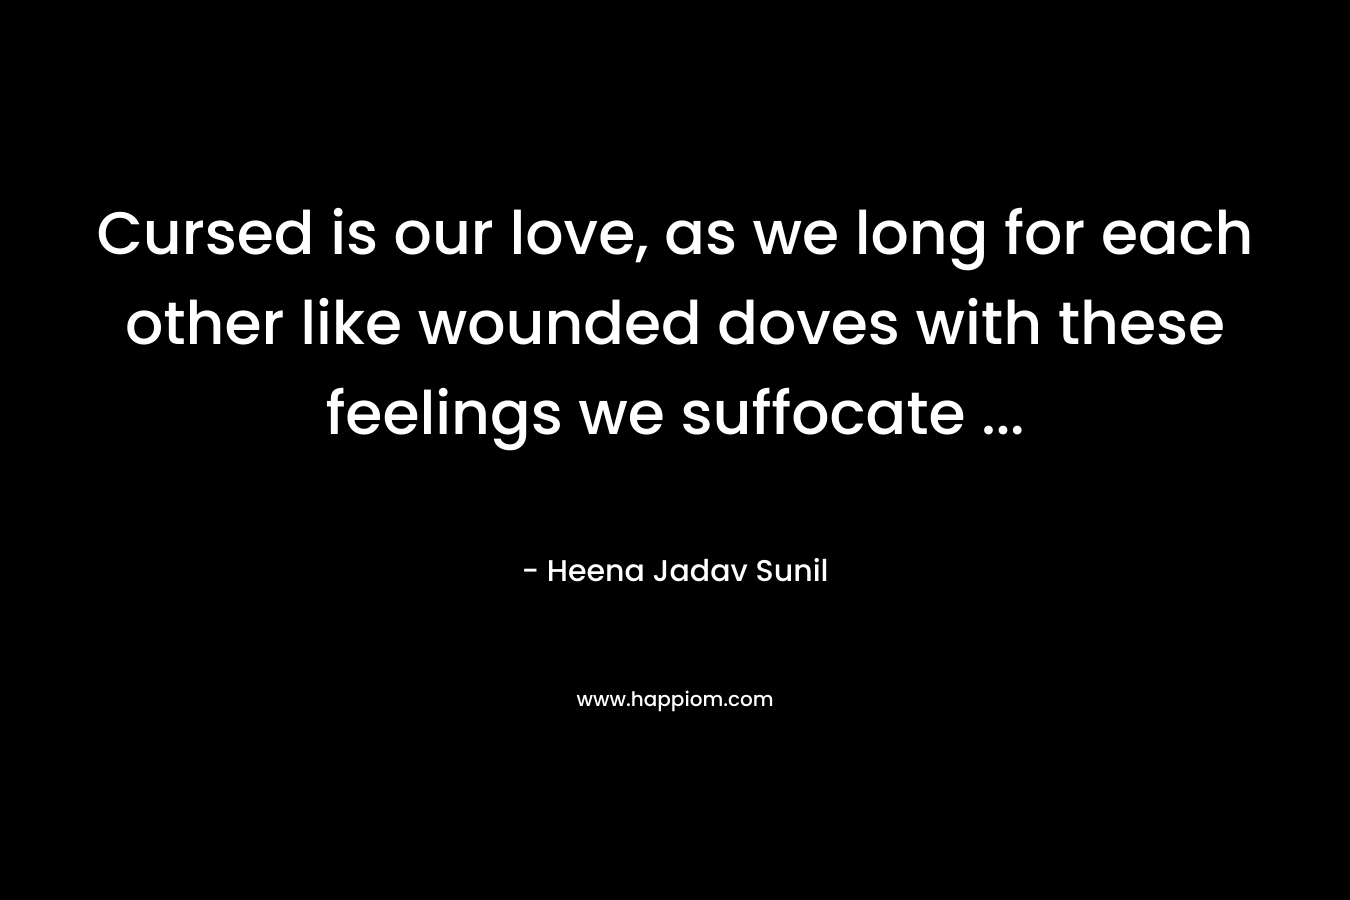 Cursed is our love, as we long for each other like wounded doves with these feelings we suffocate … – Heena Jadav Sunil